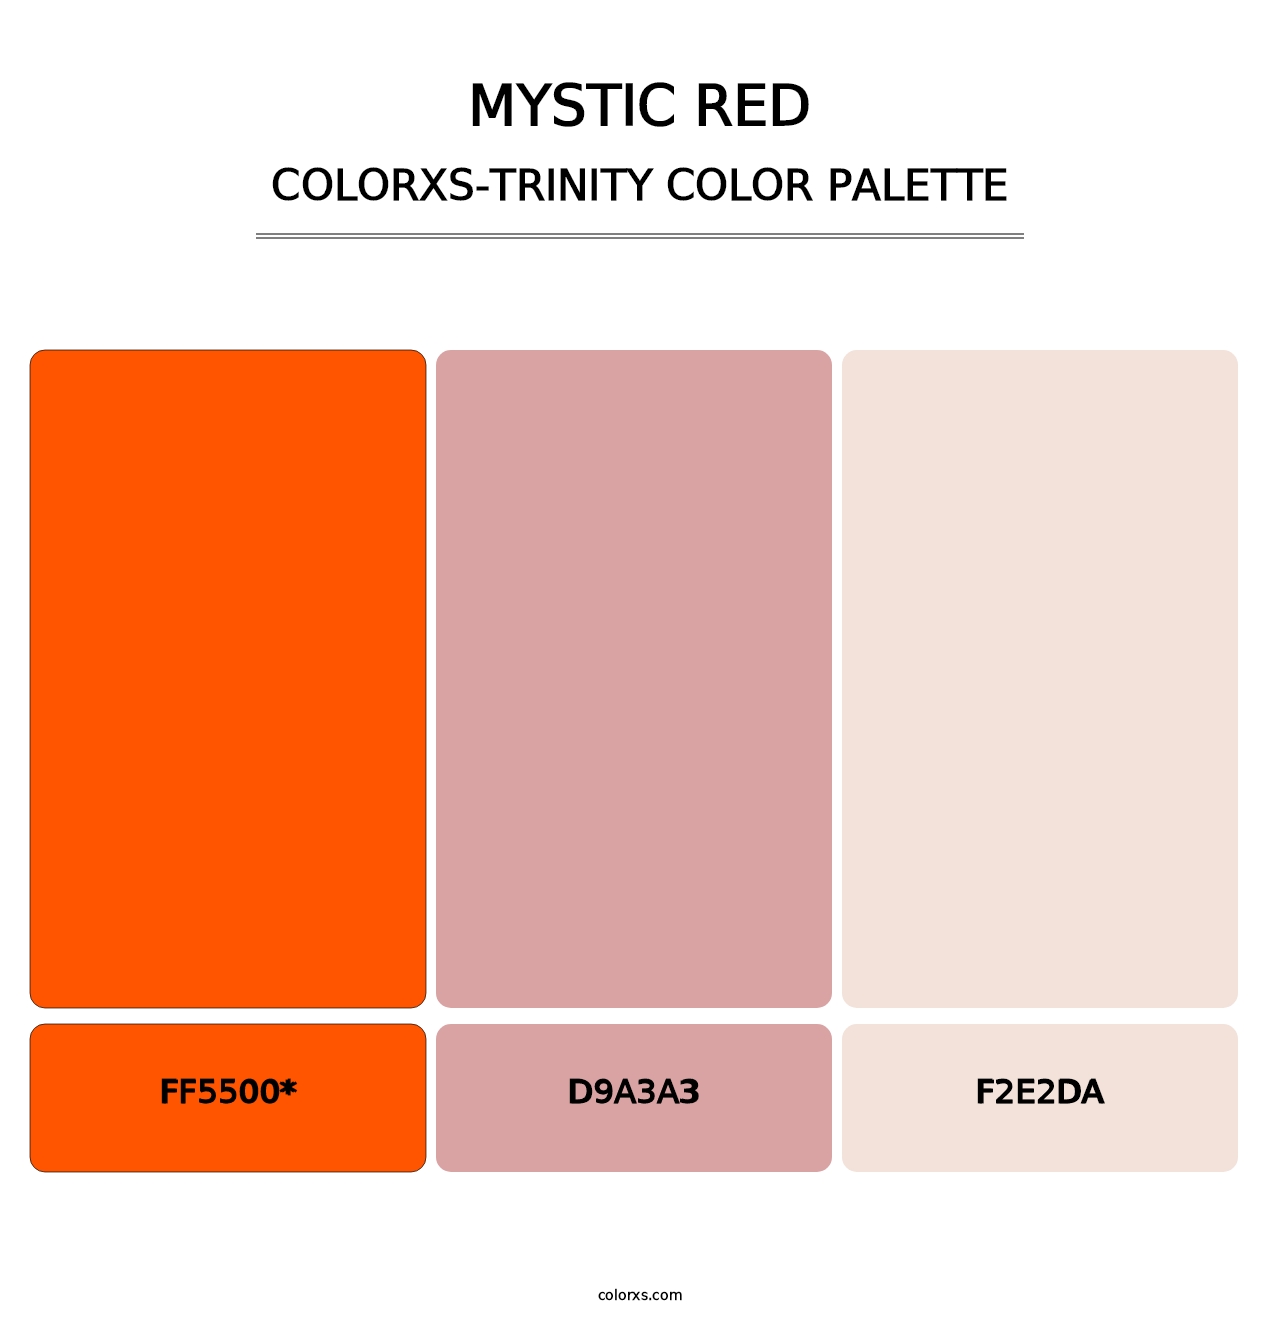 Mystic Red - Colorxs Trinity Palette